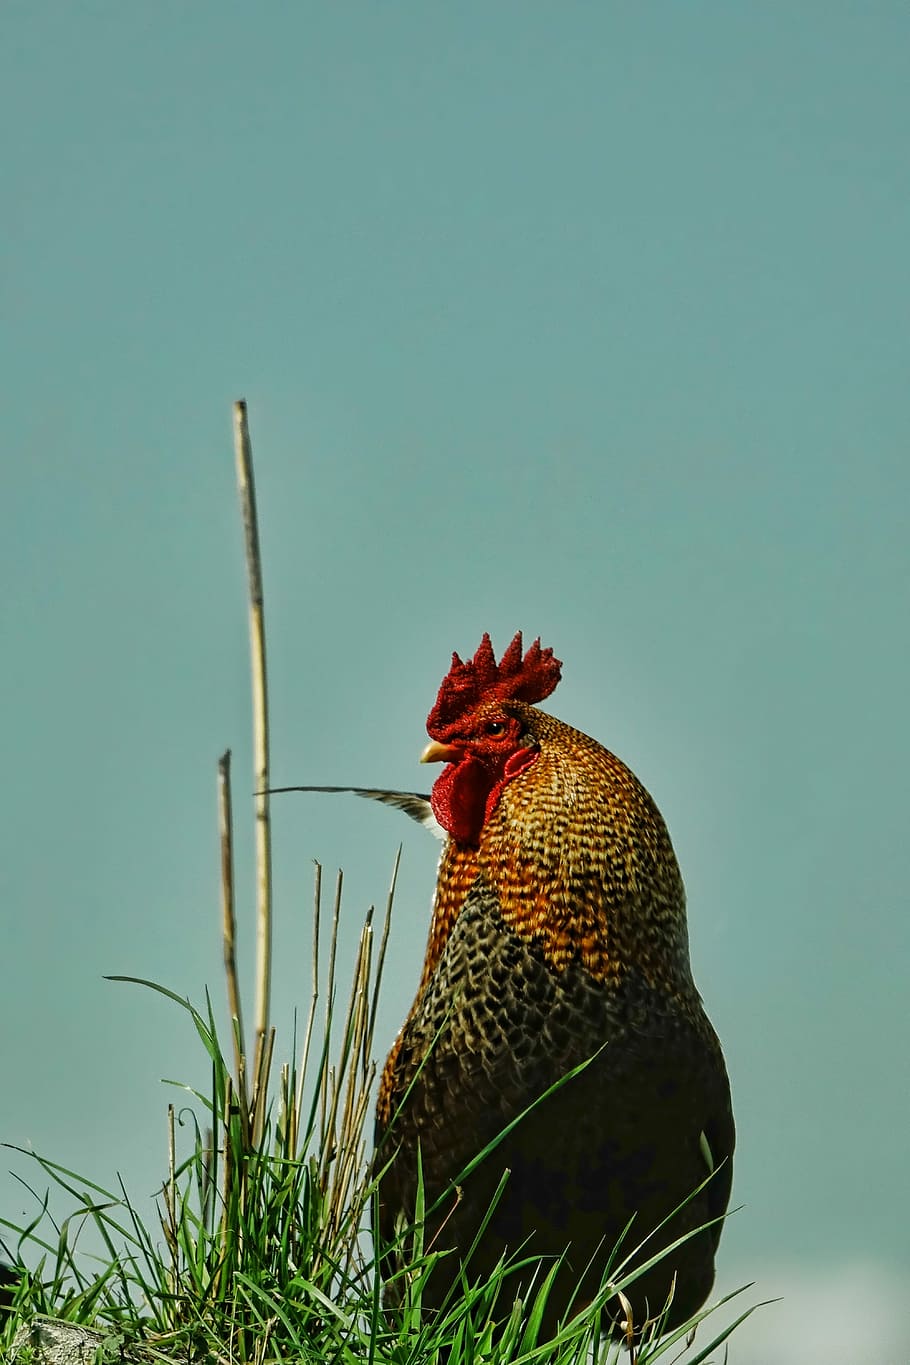 rooster, standing, grass field, nature, bird, hahn, animal world, plumage, animal themes, one animal